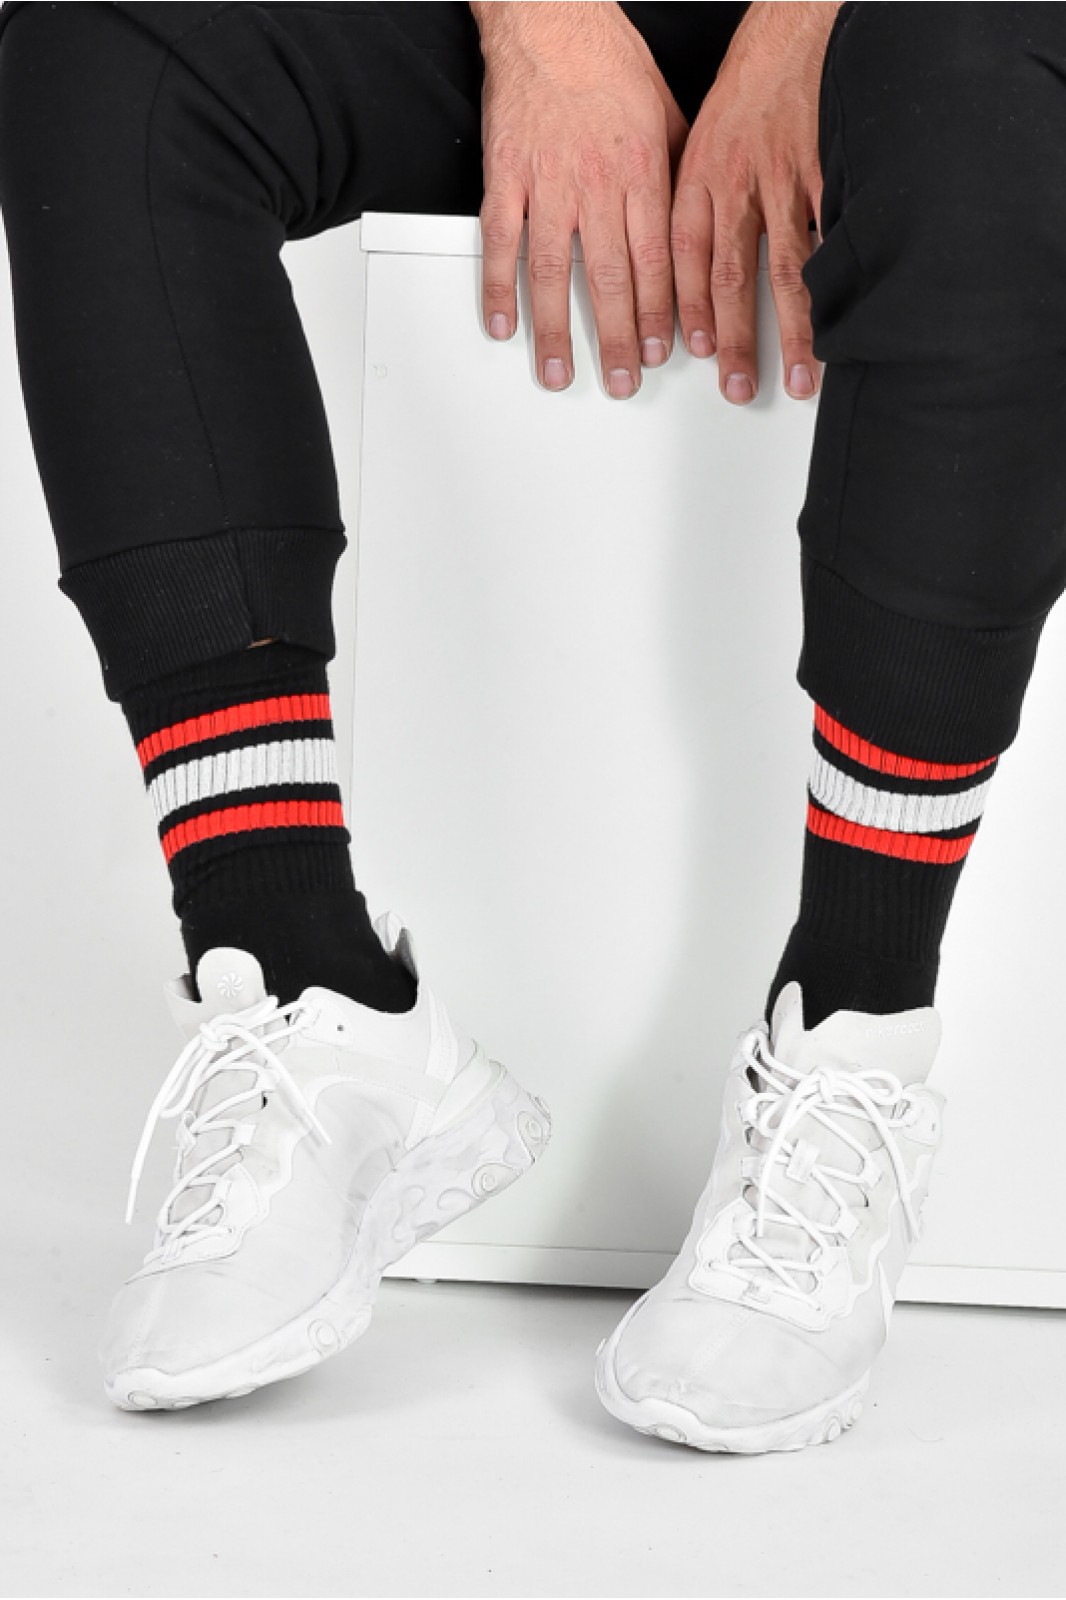 Everyday Sport Socks in Black with Red Stripes